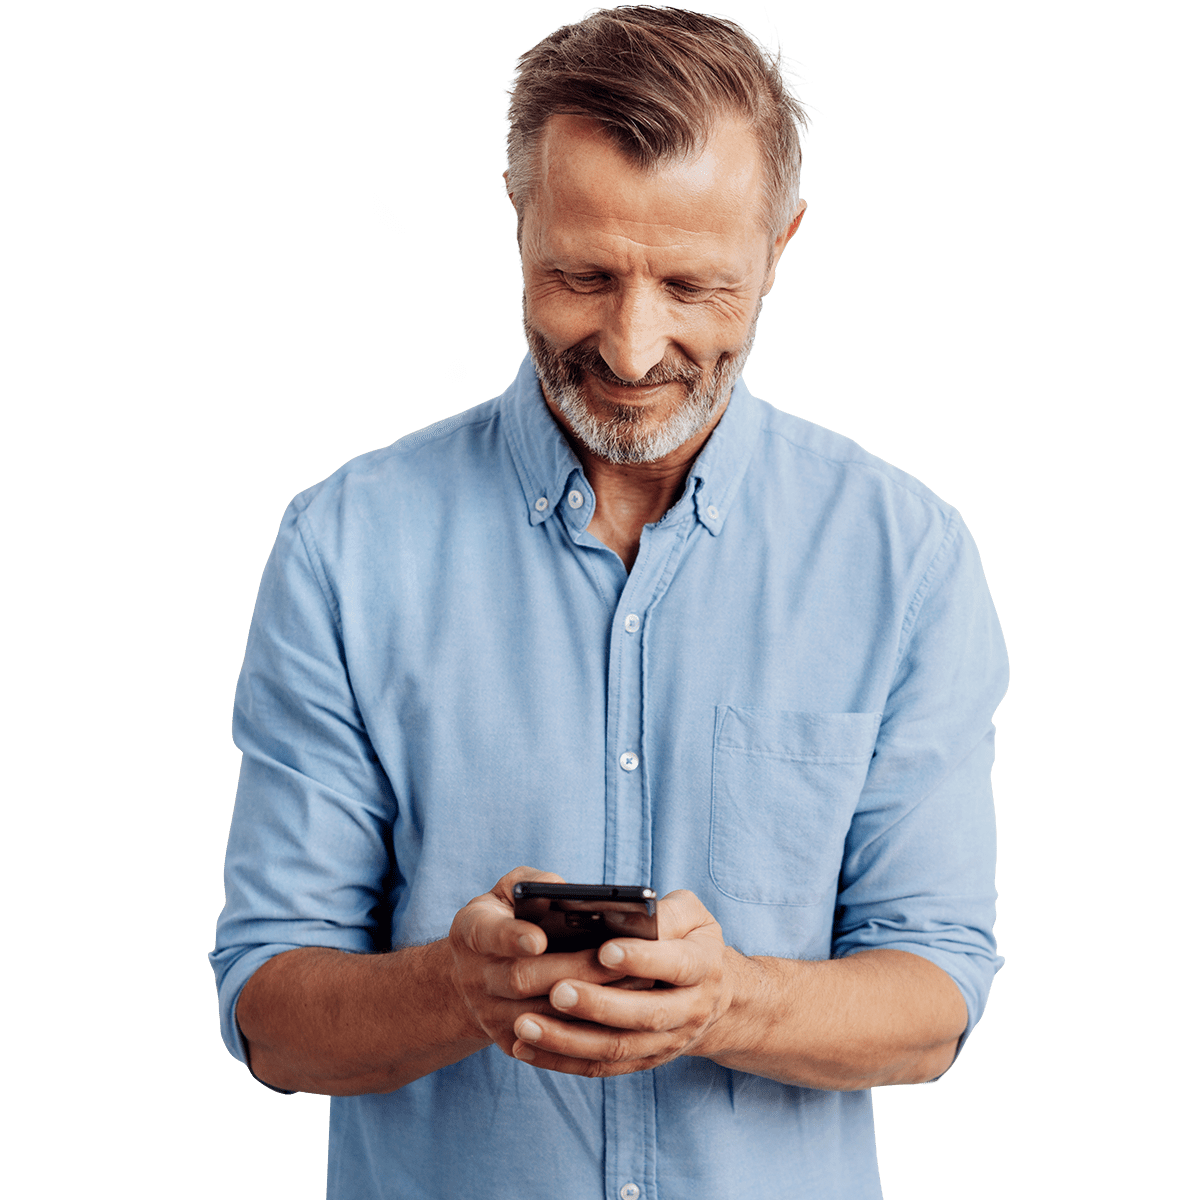 Smiling man consulting a smartphone